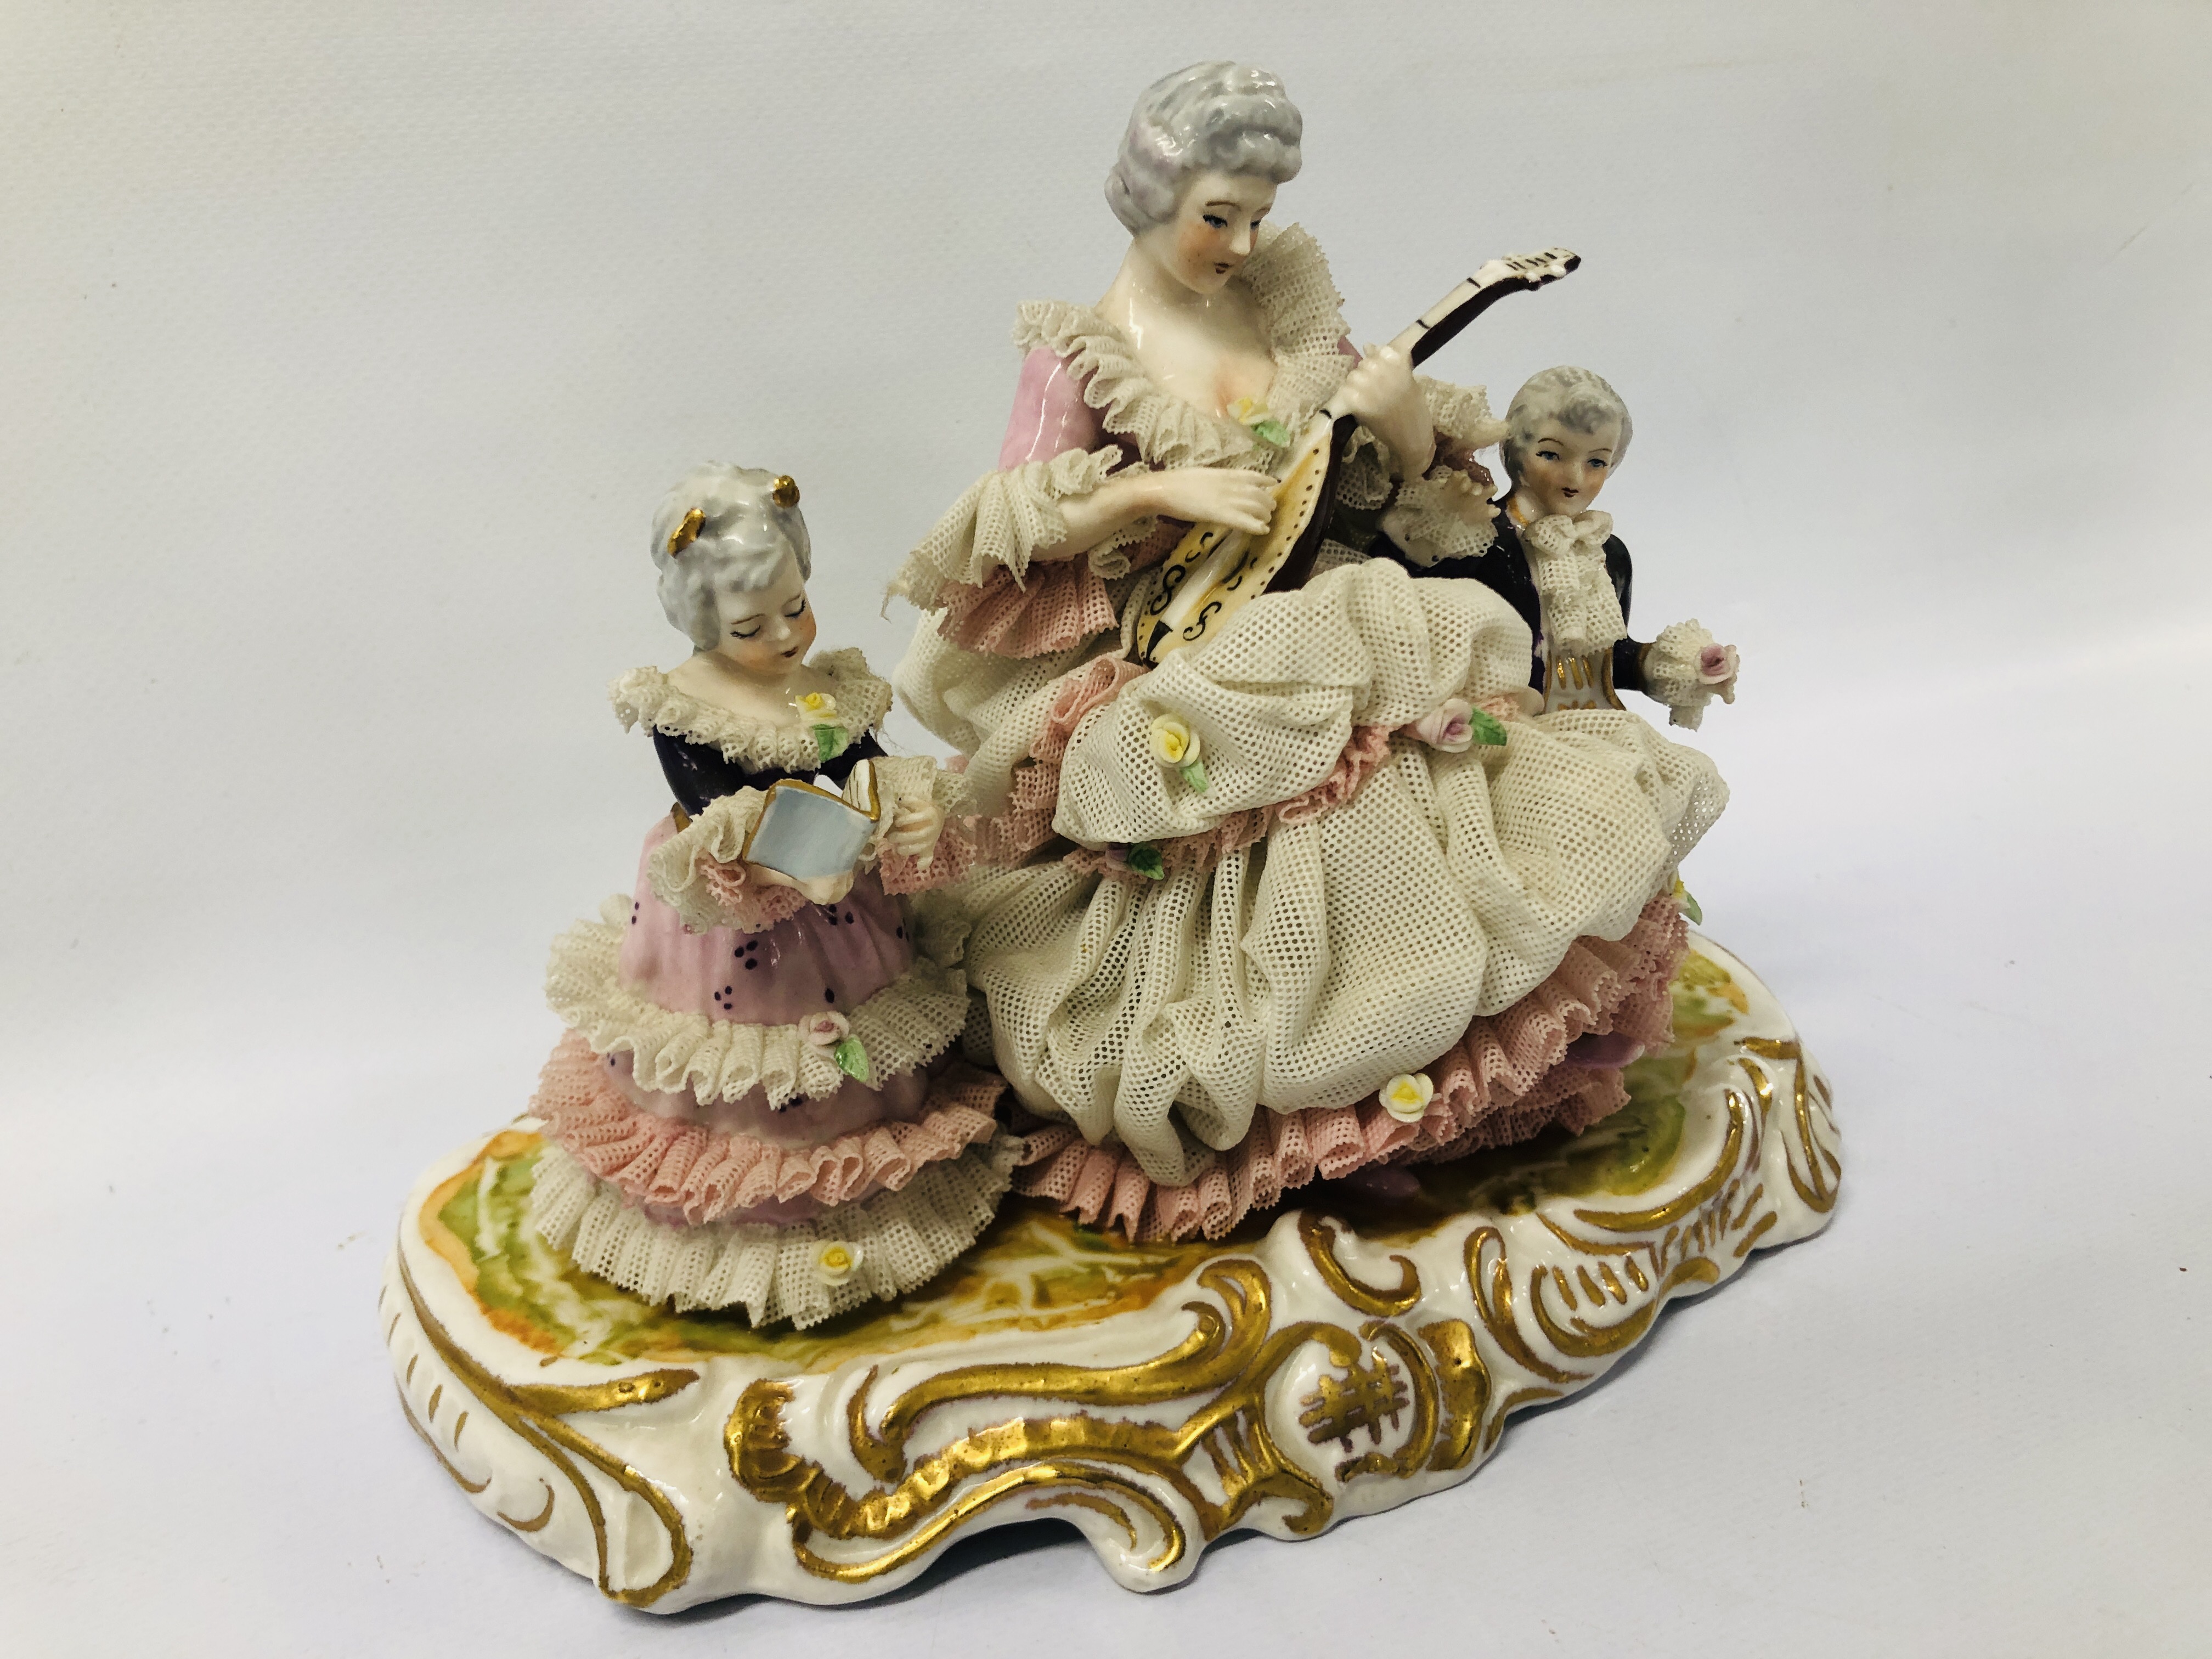 PAIR OF ITALIAN ORNAMENTS "LADY'S UPON PENNY FARTHINGS" H 24CM ALONG WITH A FIGURED CABINET - Image 3 of 10